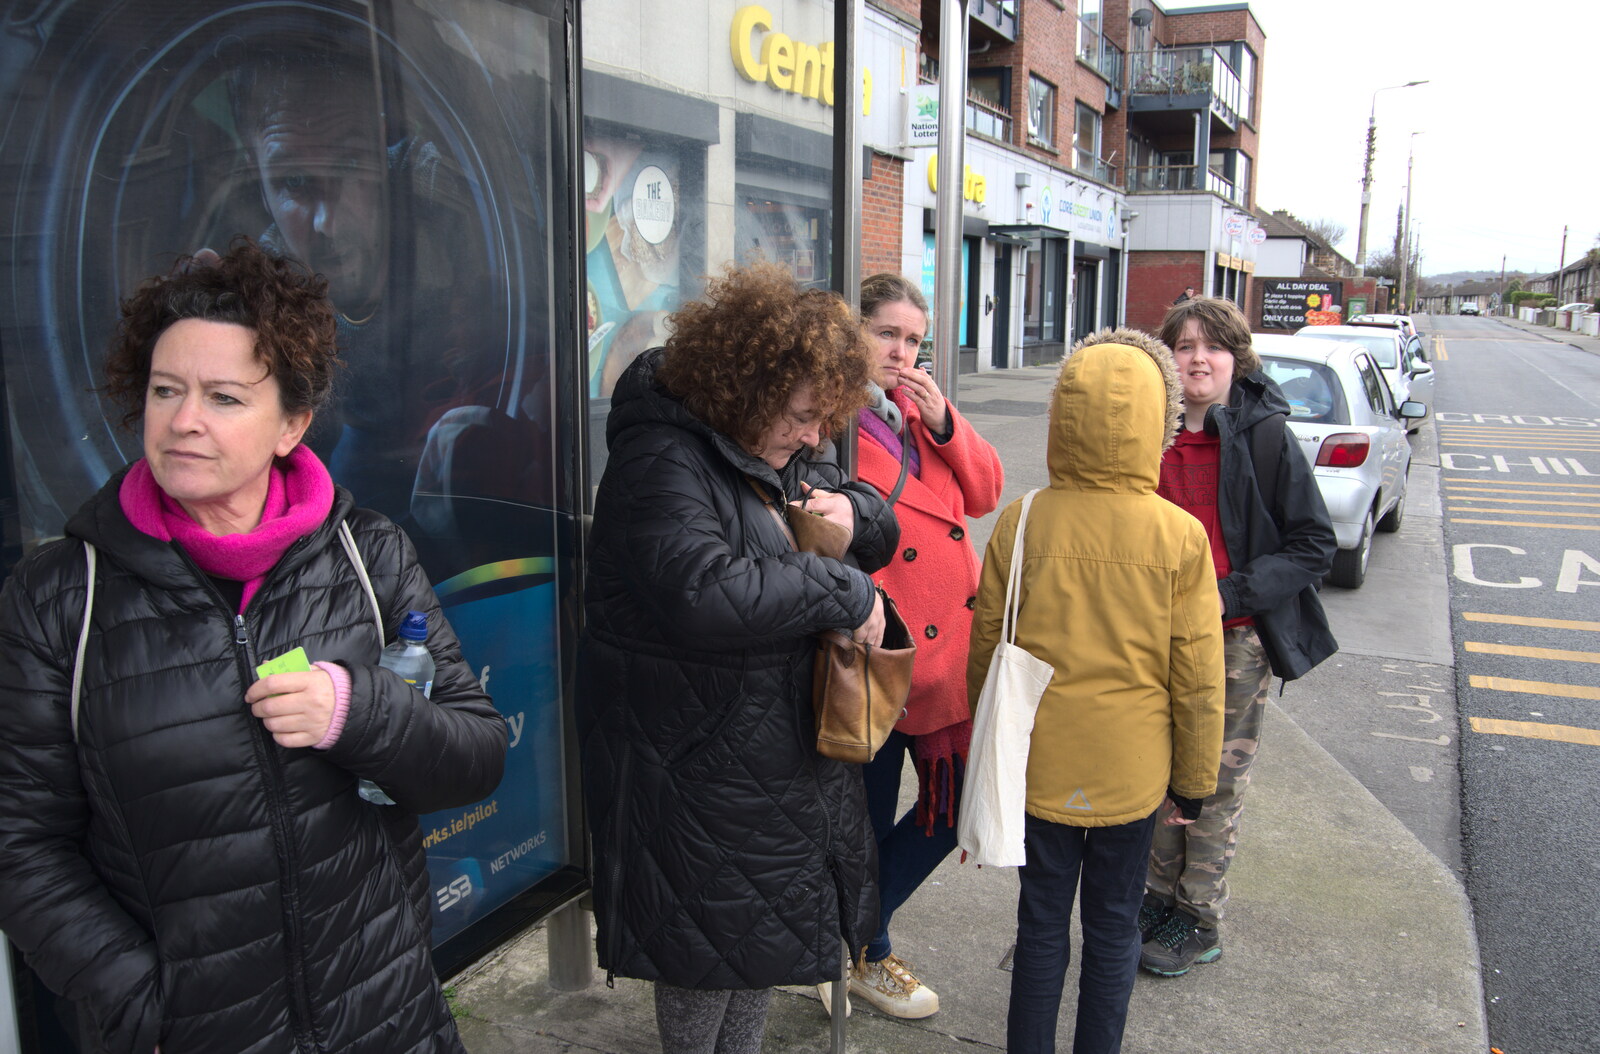 The End of the Breffni, Blackrock, Dublin - 18th February 2023: We're hanging around the bus shelter again